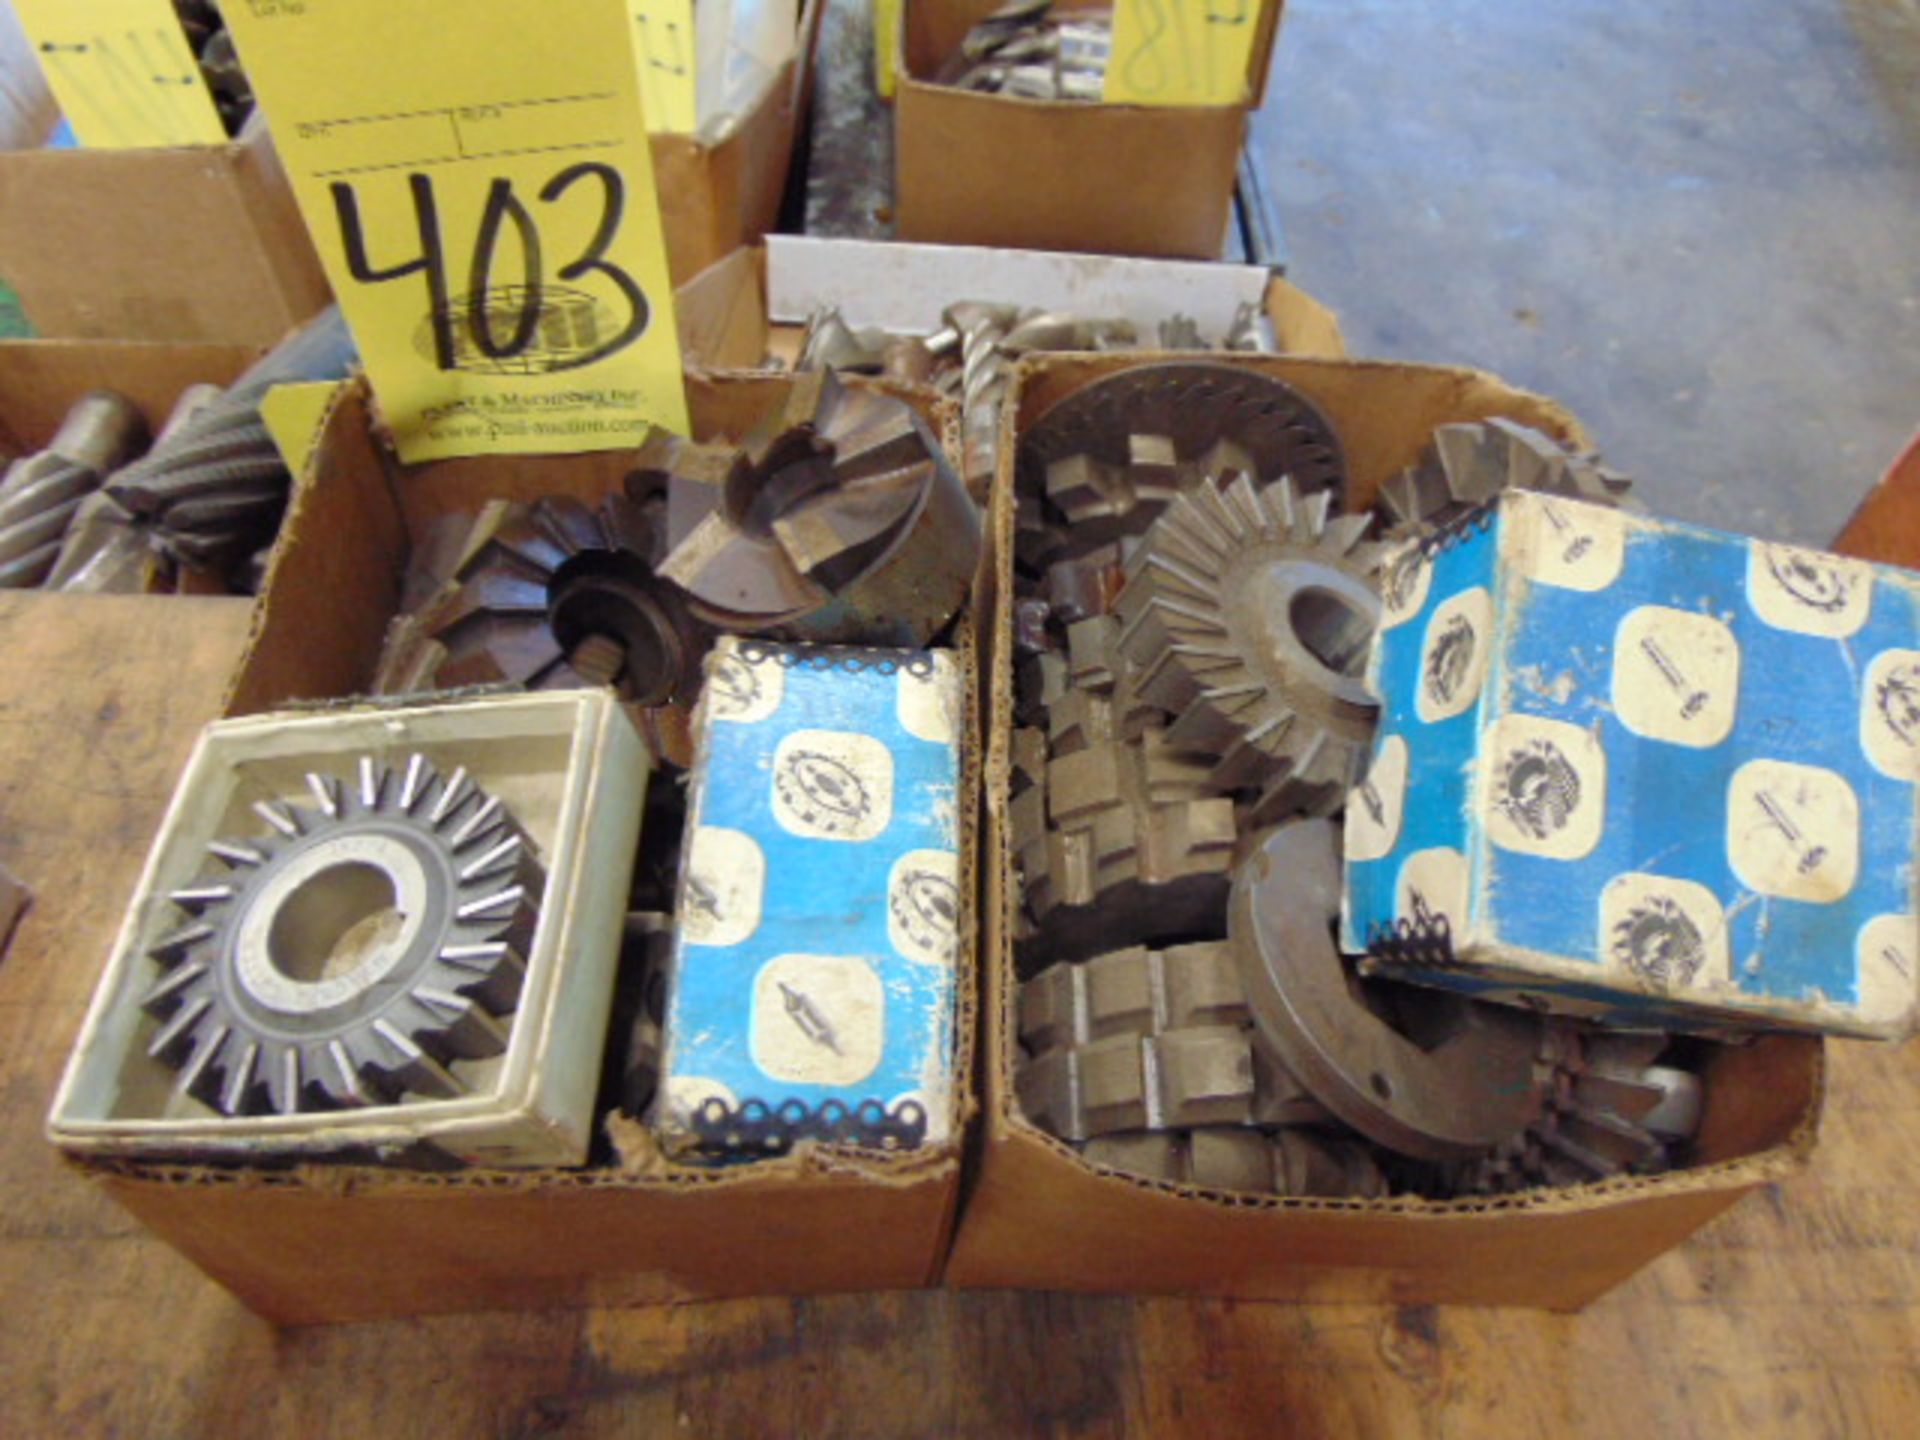 LOT OF MILLING CUTTERS, assorted (in two boxes)